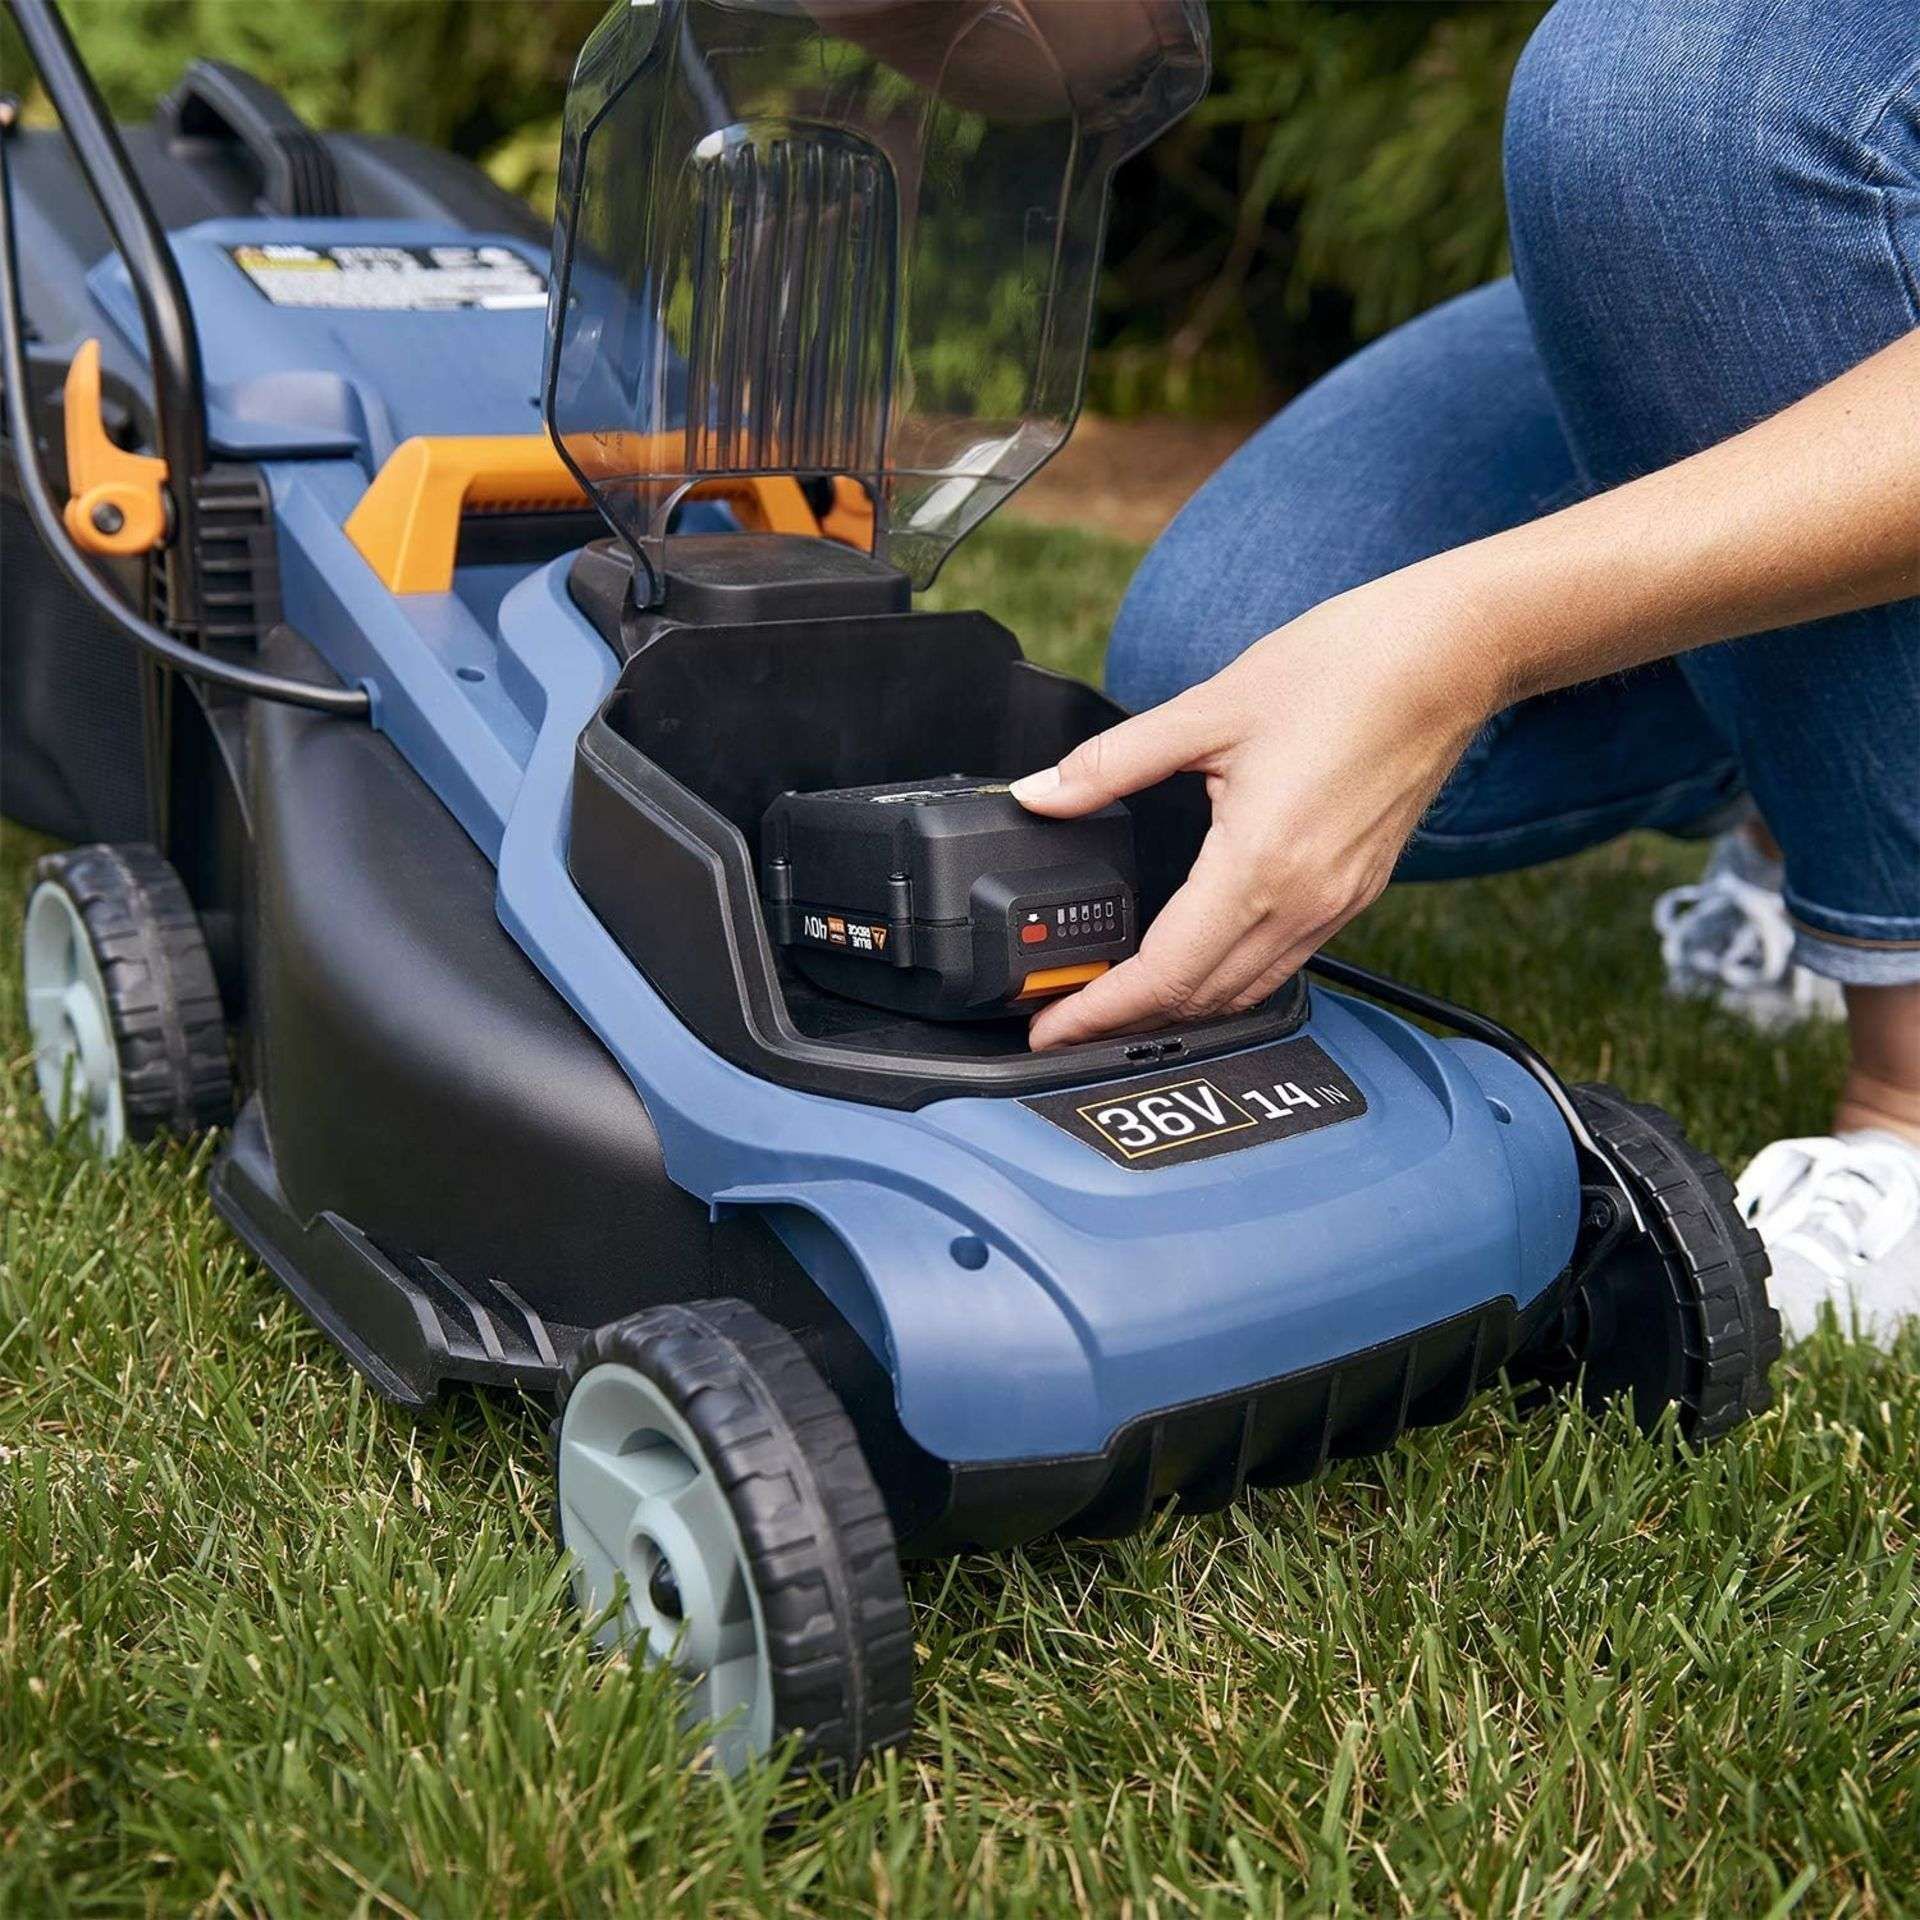 NEW & BOXED BLUE RIDGE 36V Cordless Lawnmower with 2.0 Ah Li-ion Battery. RRP £229 EACH. Powerful - Image 3 of 4